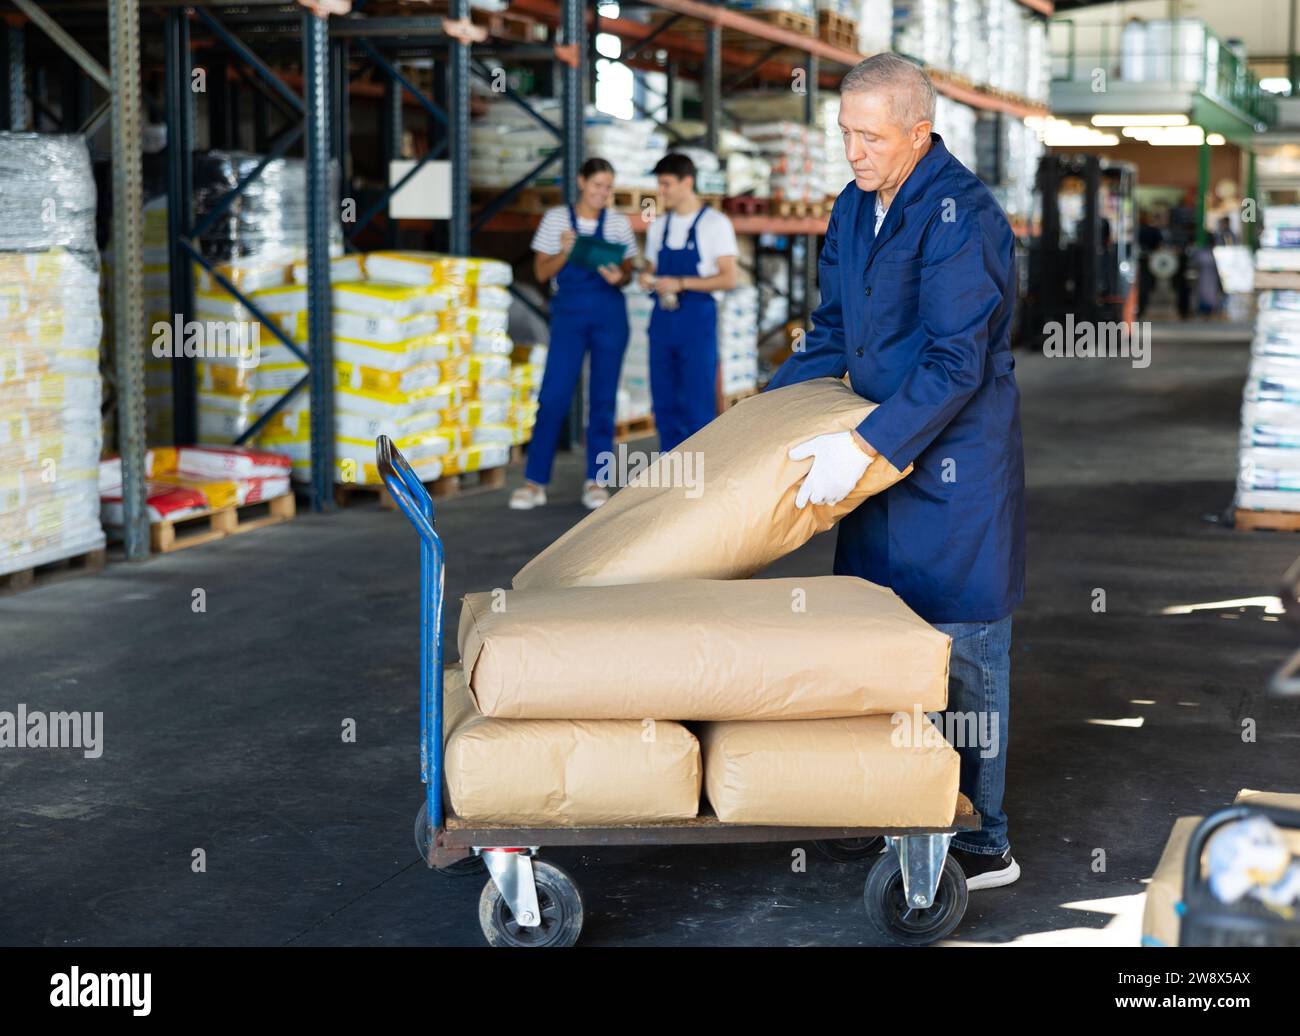 Elderly man loader with cargo cart loaded with bags Stock Photo